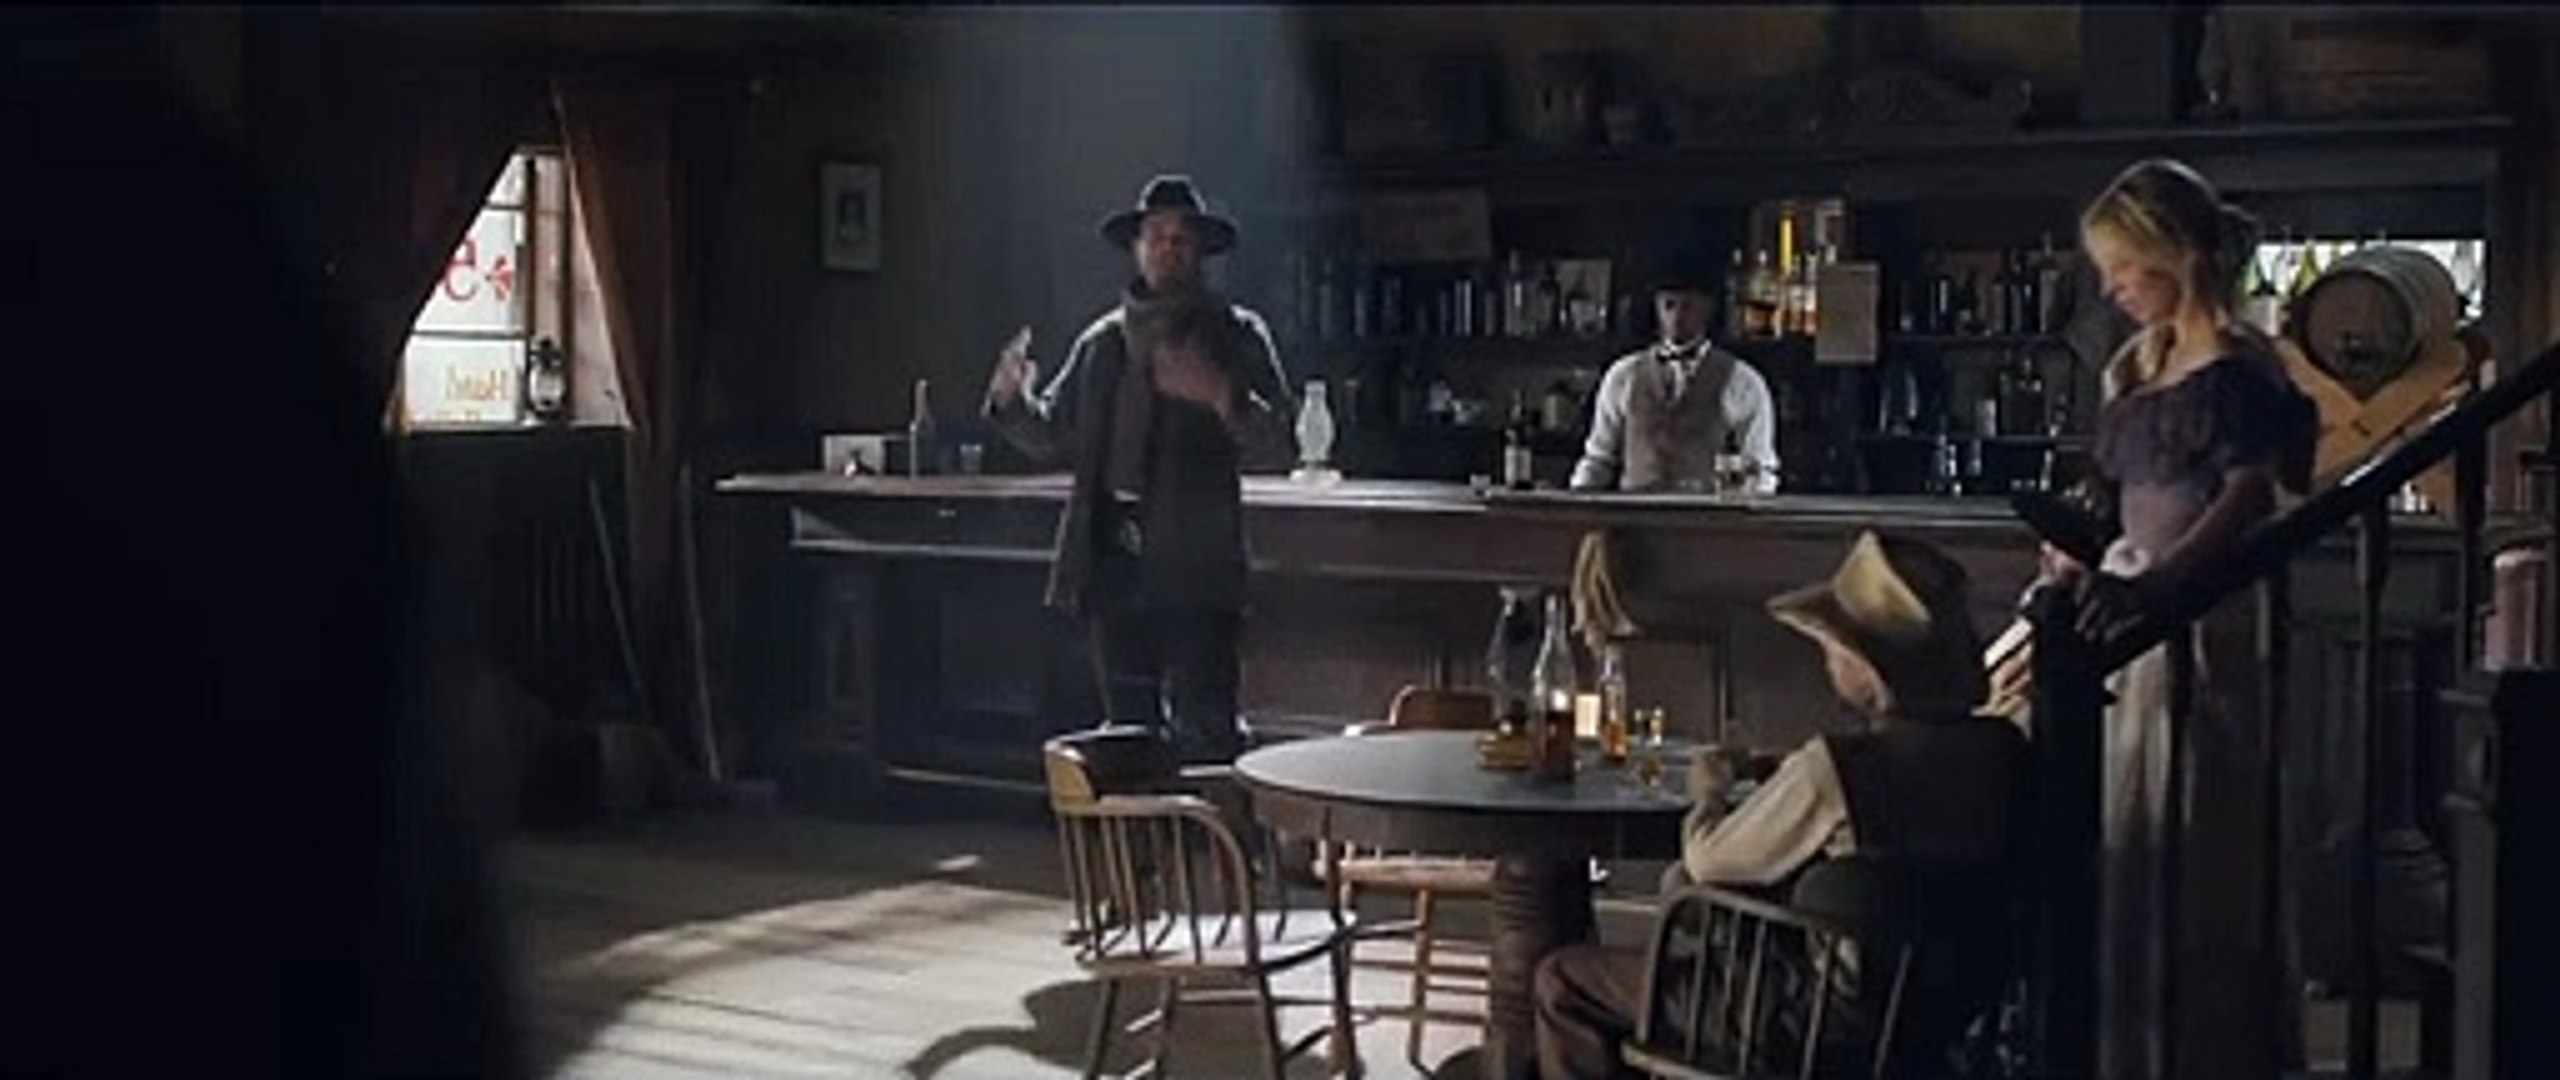 The Gunfighter | A Short Film By Eric Kissack (Narrated By Nick Offerman) -  video Dailymotion